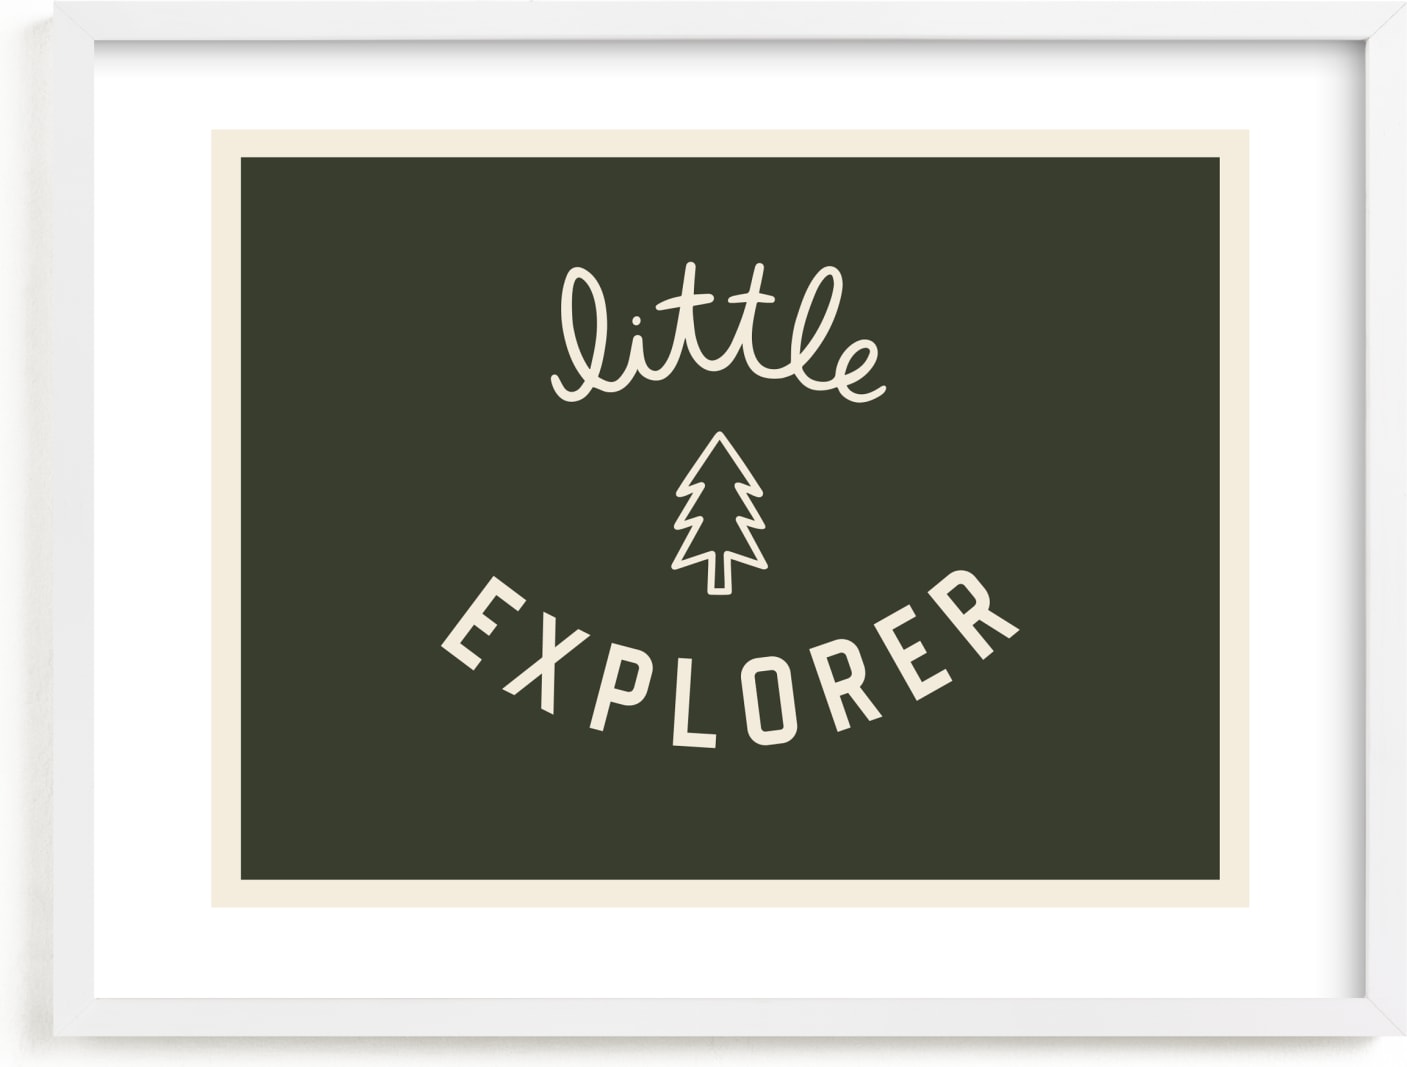 This is a green art by Darby McGuire called Little Explorer Flag.